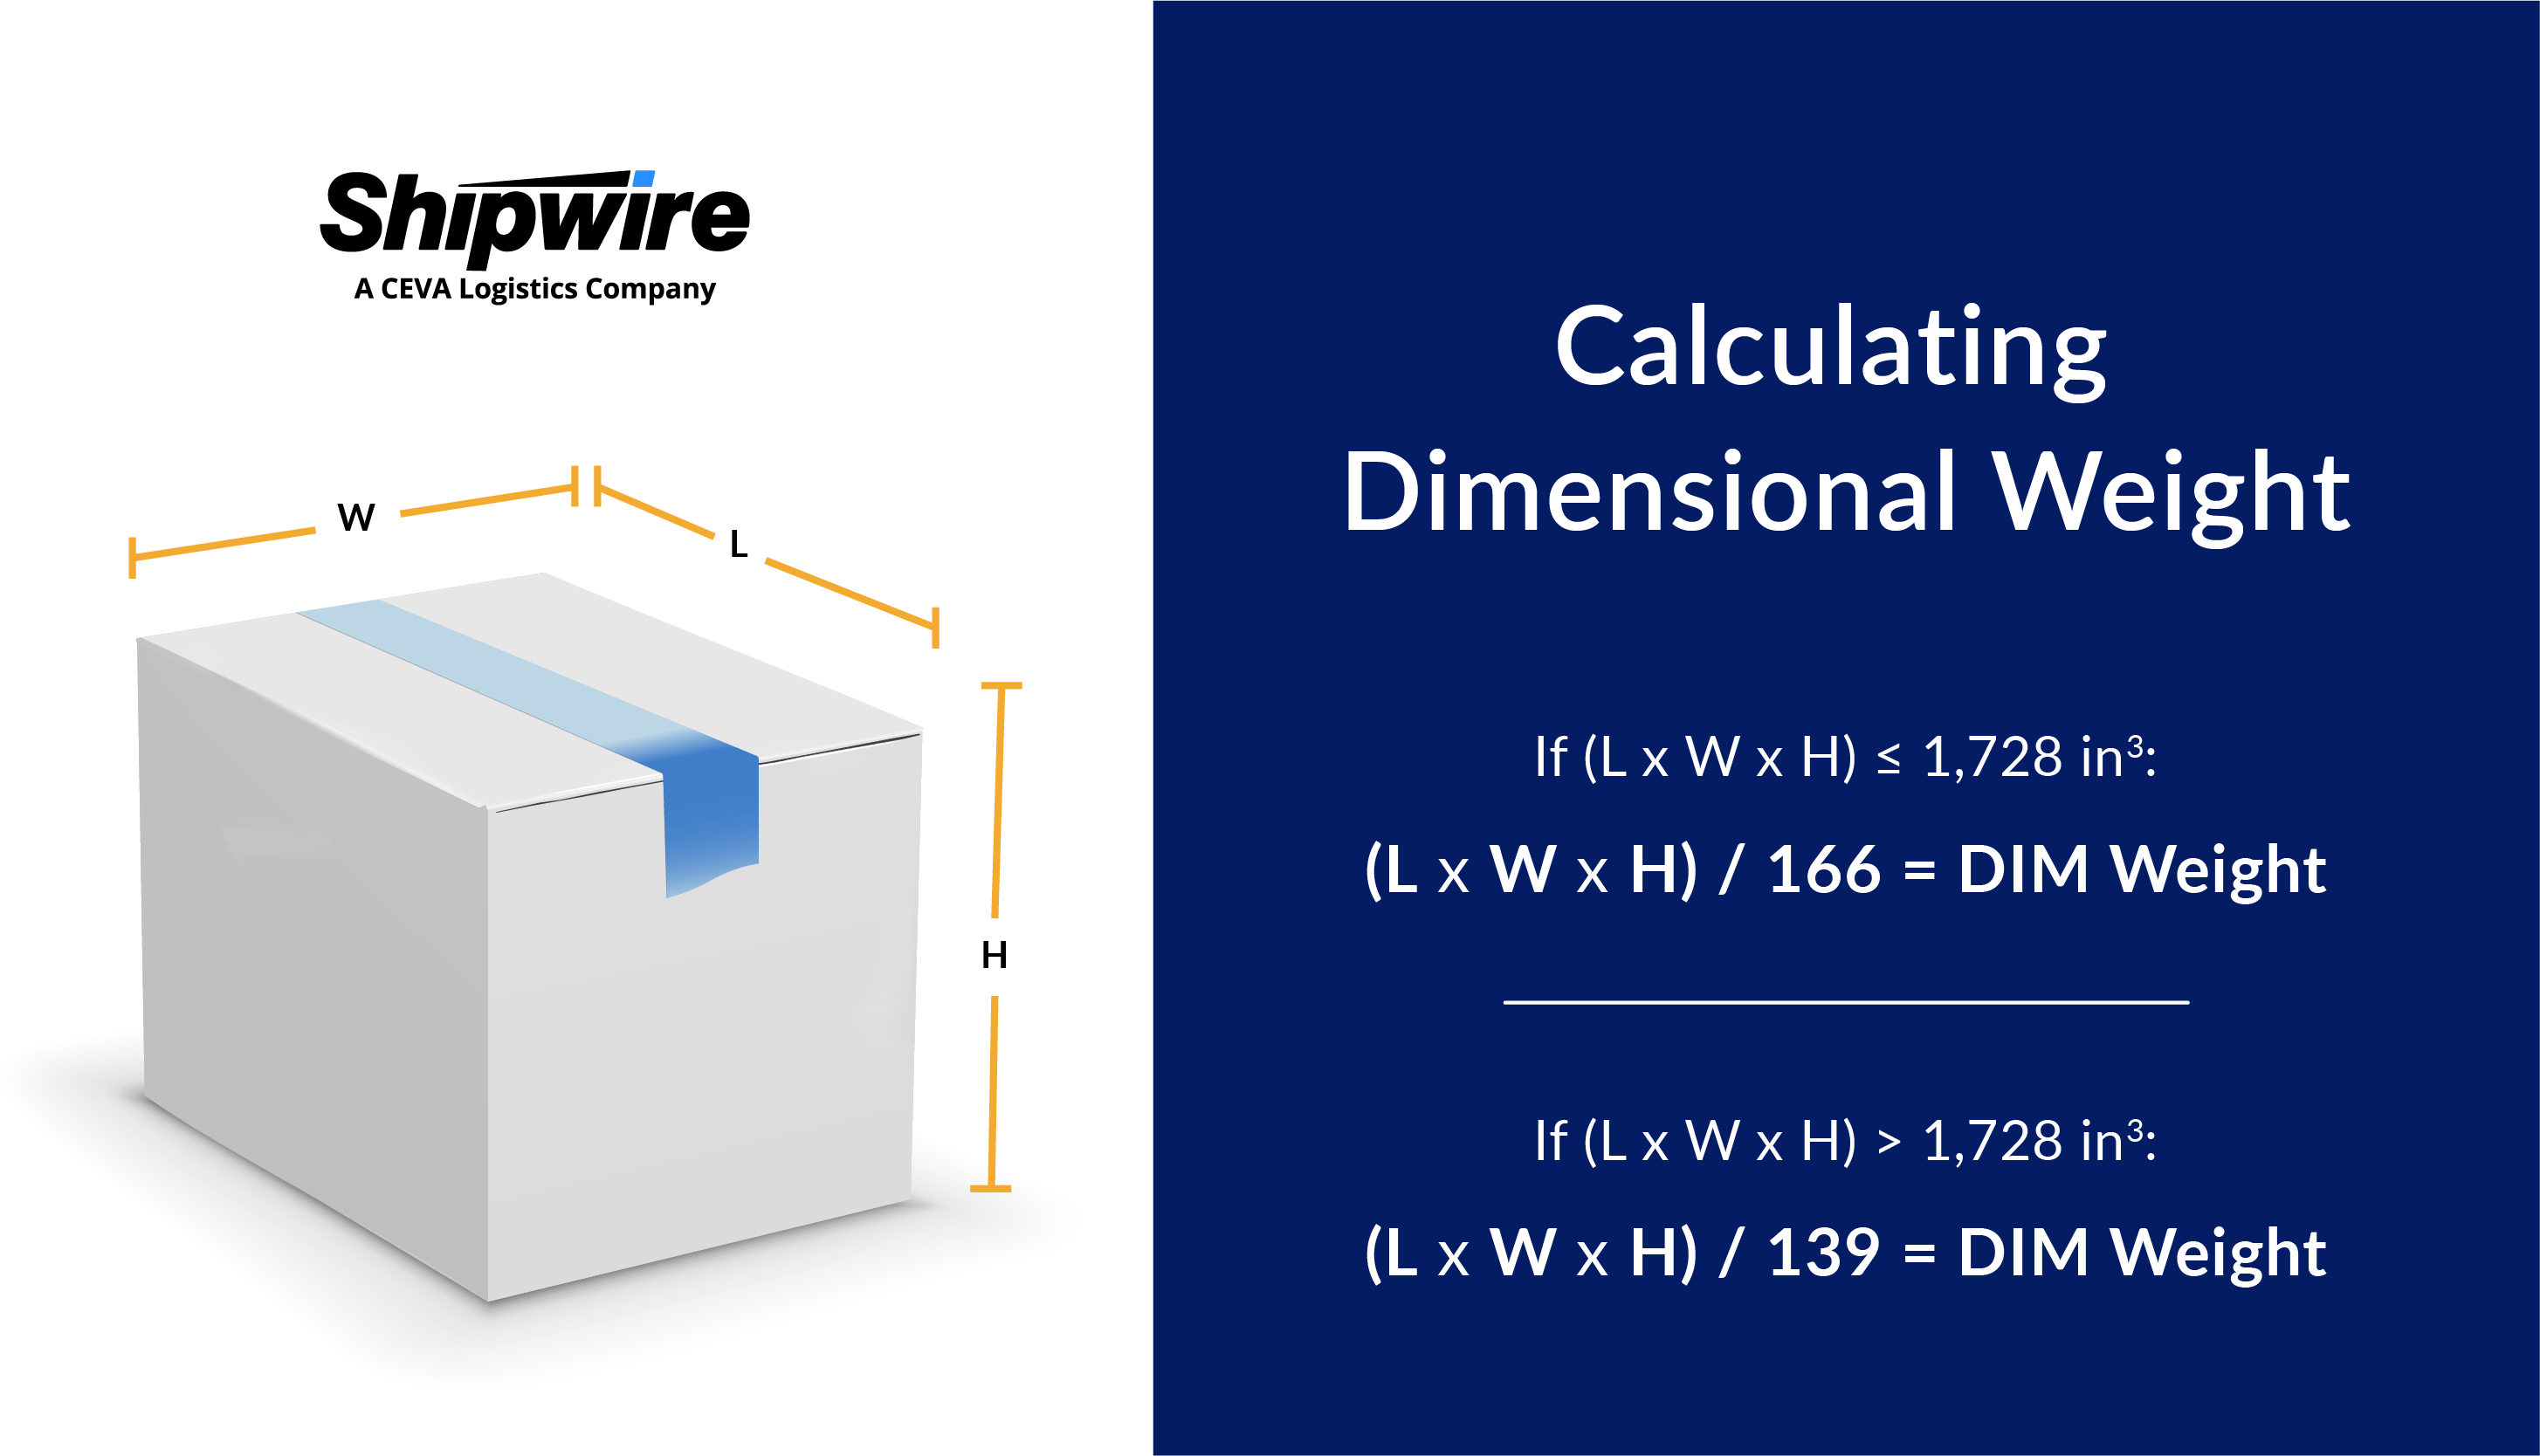 Shipwire, calculating dimensional weight